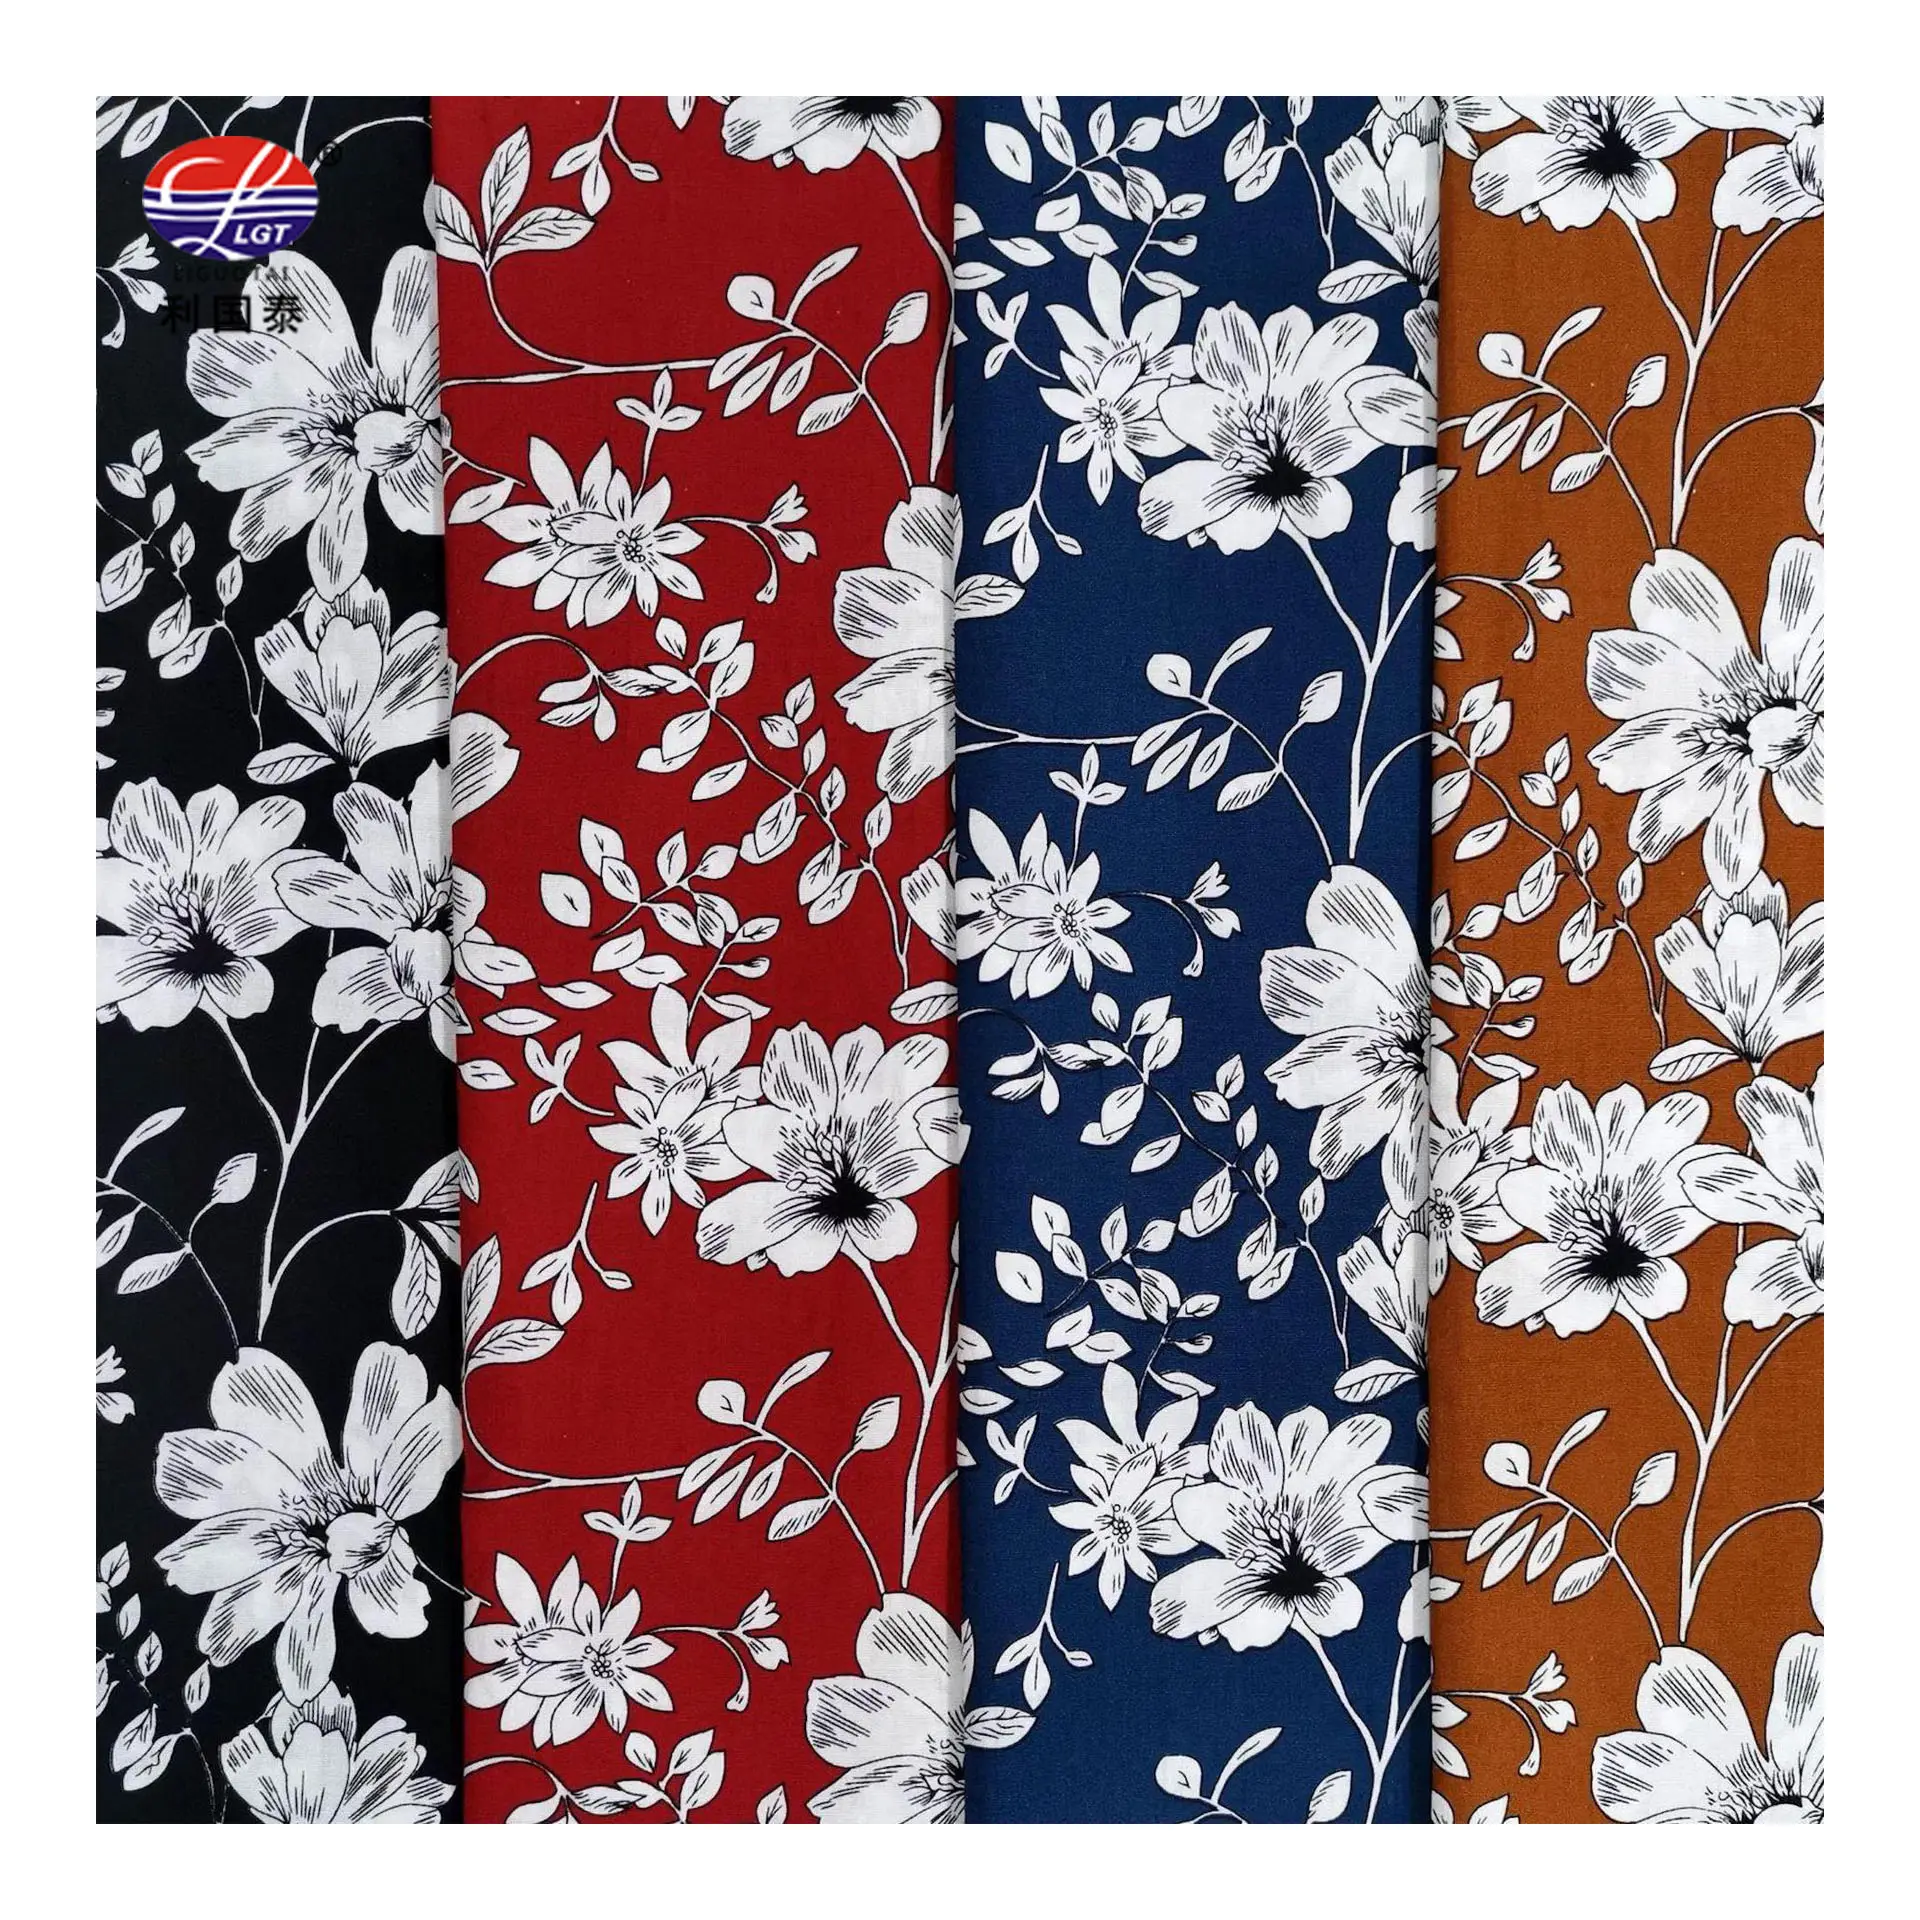 New line high quality 100% Cotton factory direct sales poplin printed flower fabric for Casual wear